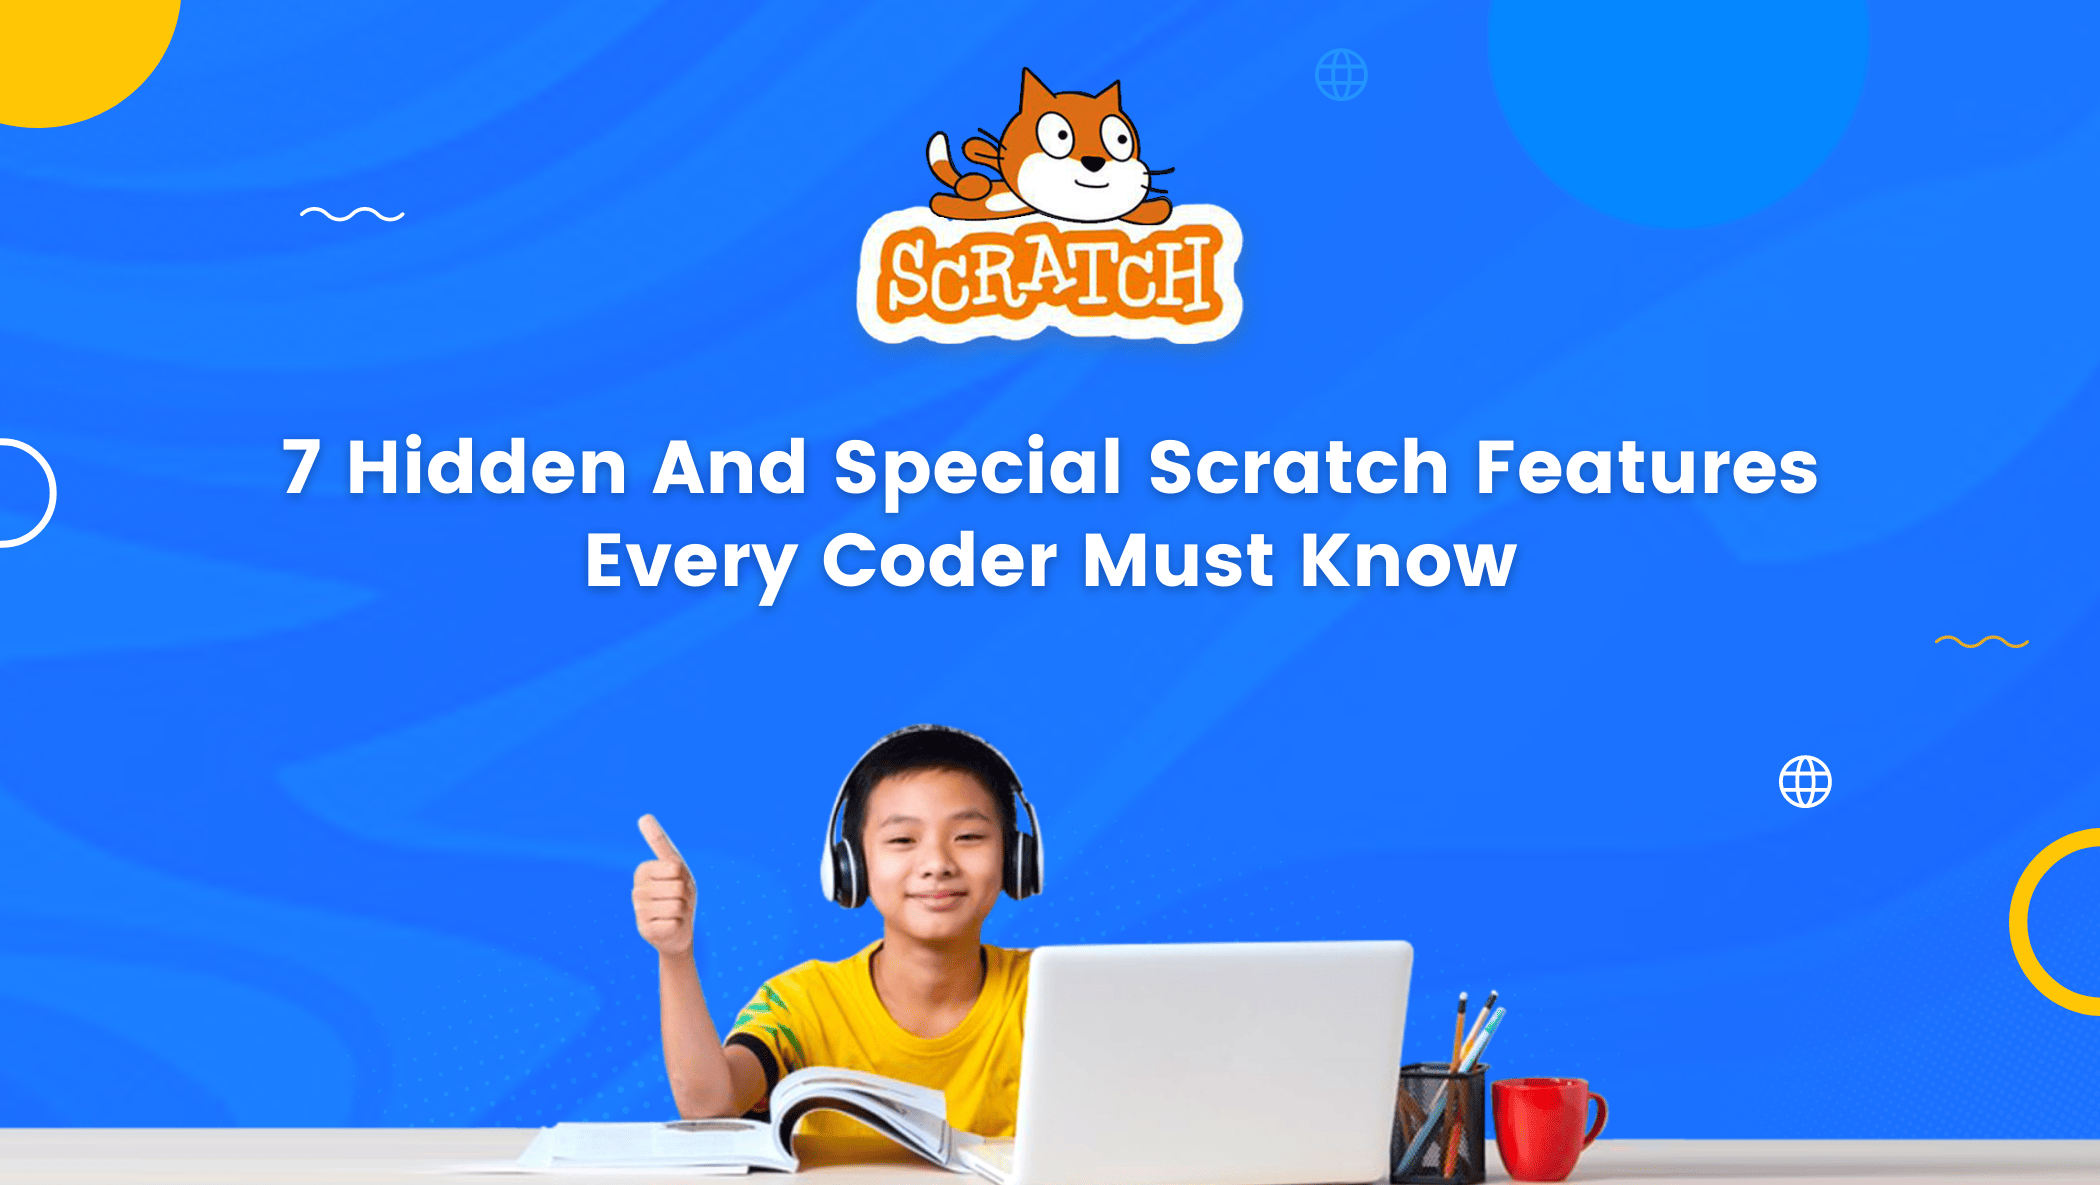 Hidden And Special Scratch Features